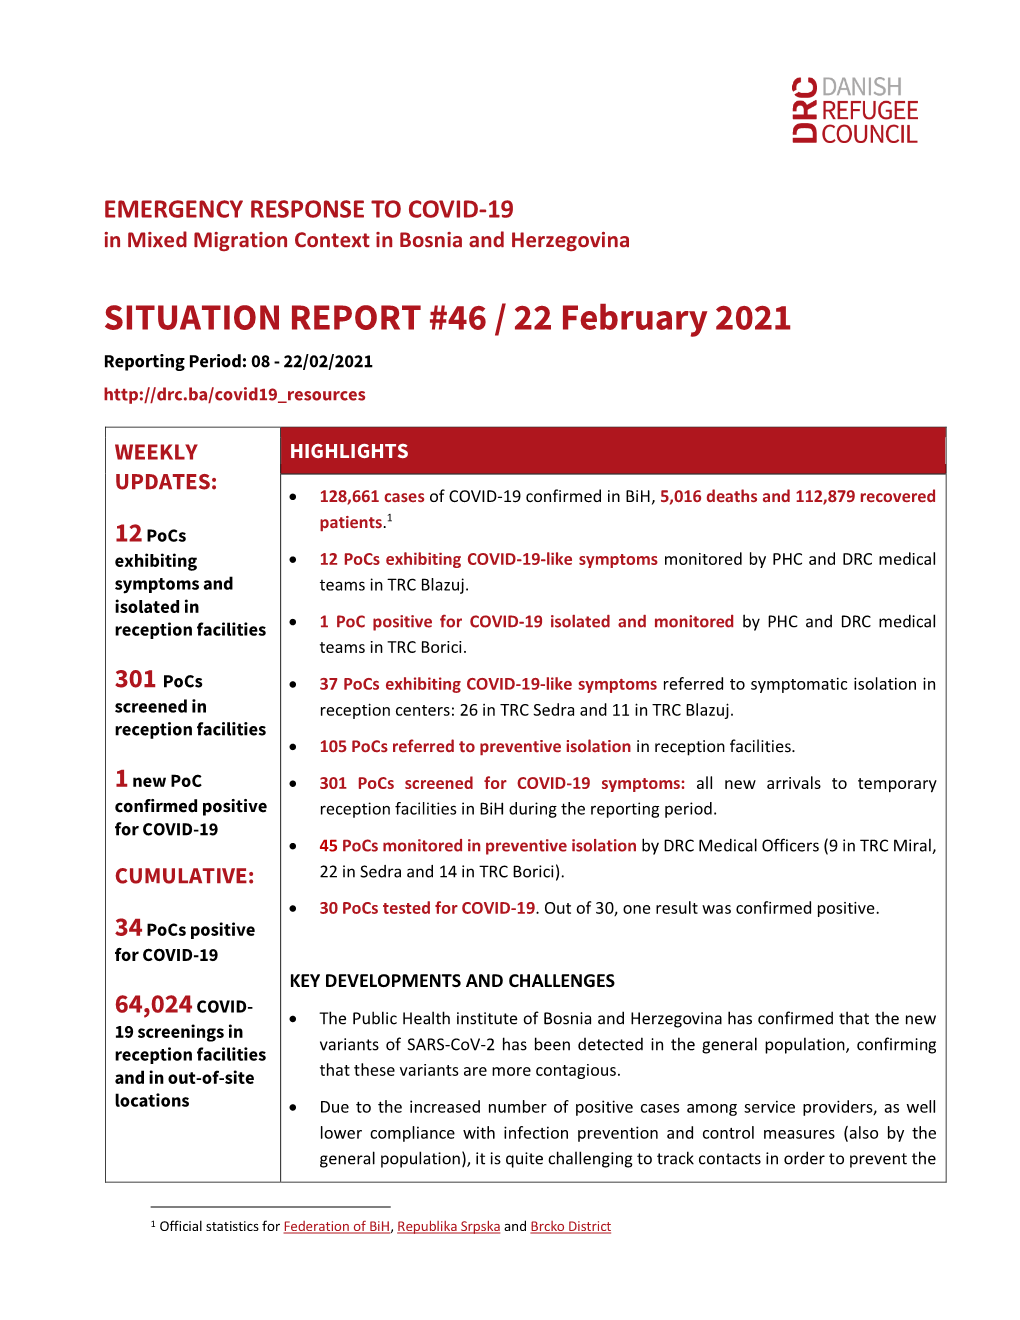 SITUATION REPORT #46 / 22 February 2021 Reporting Period: 08 - 22/02/2021